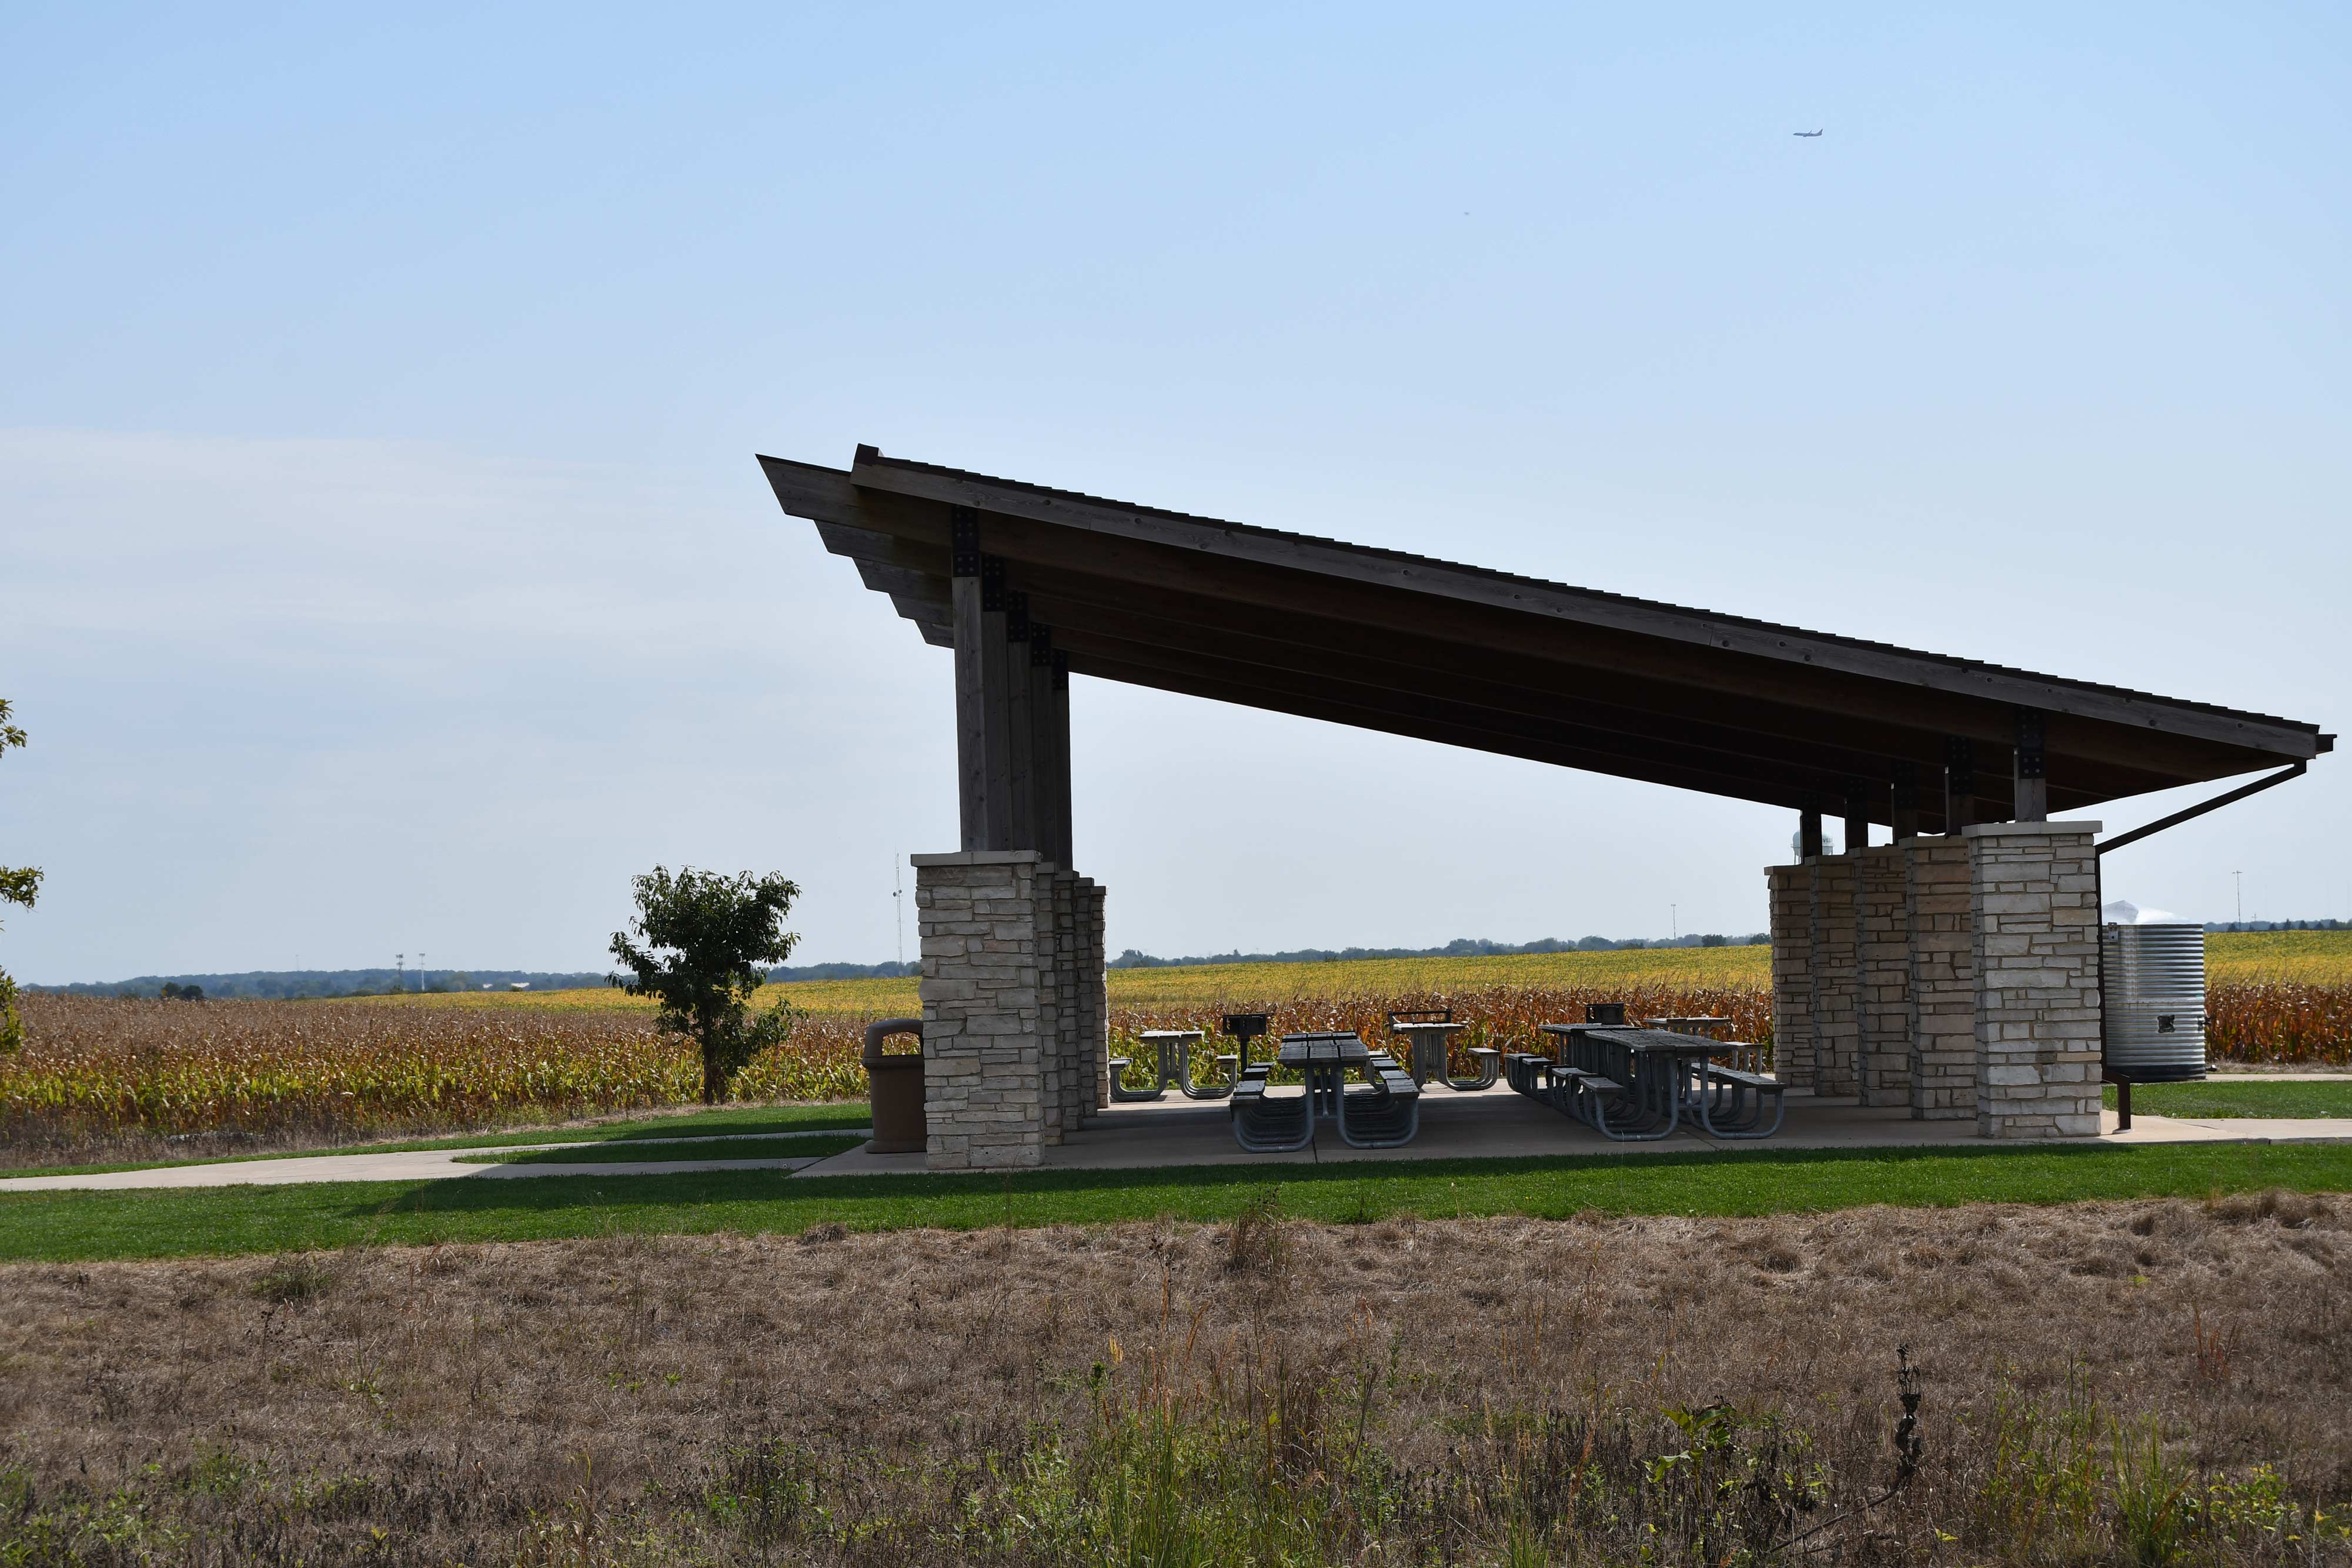 The picnic shelter at Prairie Bluff Preserve.